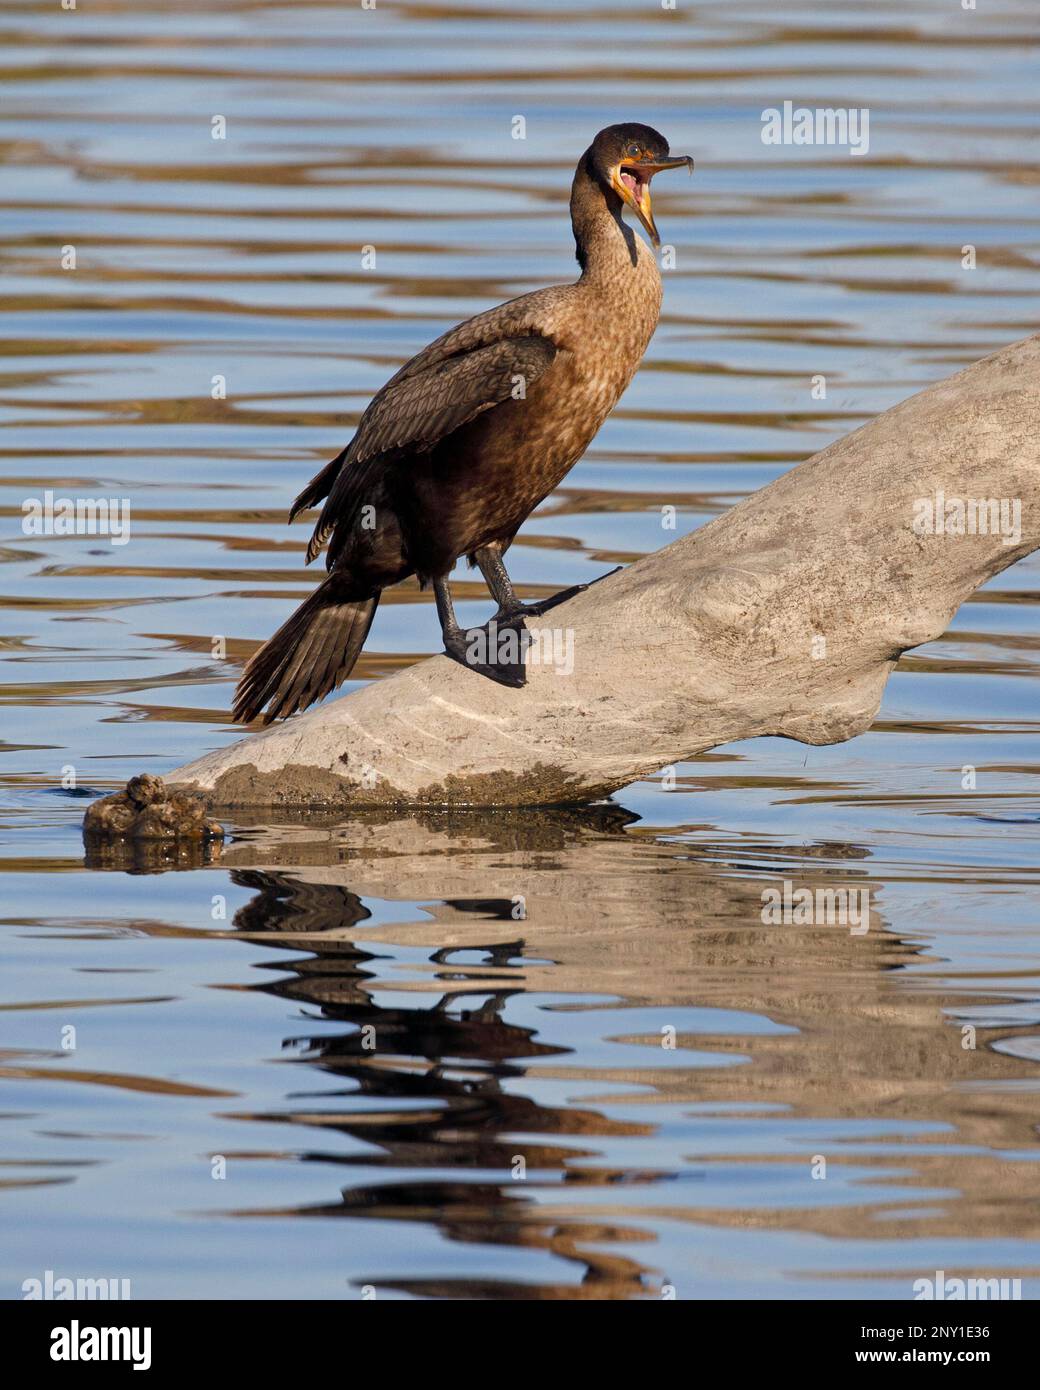 Double-crested Cormorant with mouth open perched on a log in the Bow River, Calgary, Canada  (Nannopterum auritum) Stock Photo